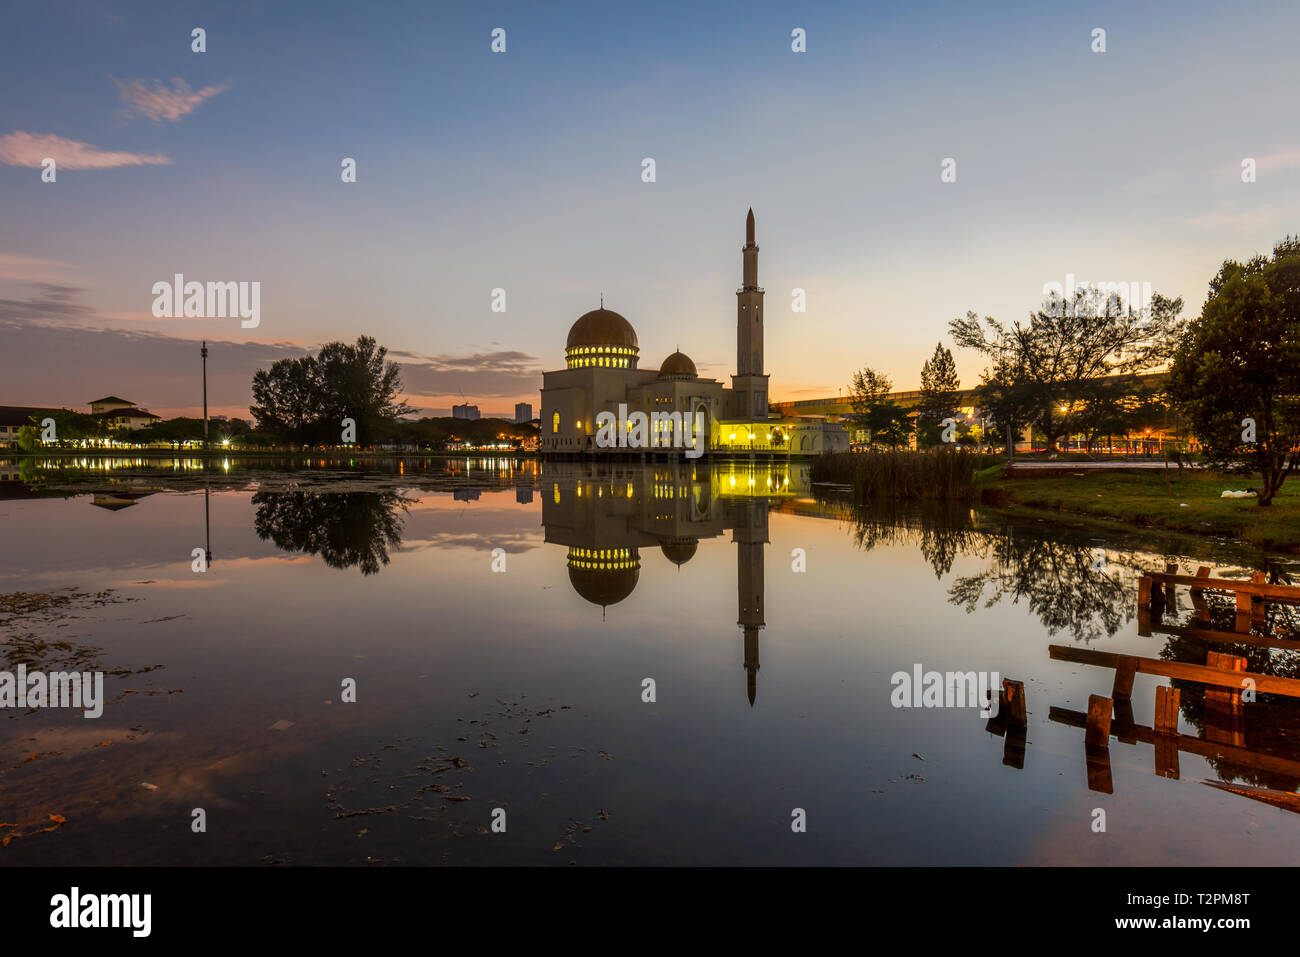 Puchong Mosque scenery before sunrise, blue hour, reflection Stock Photo